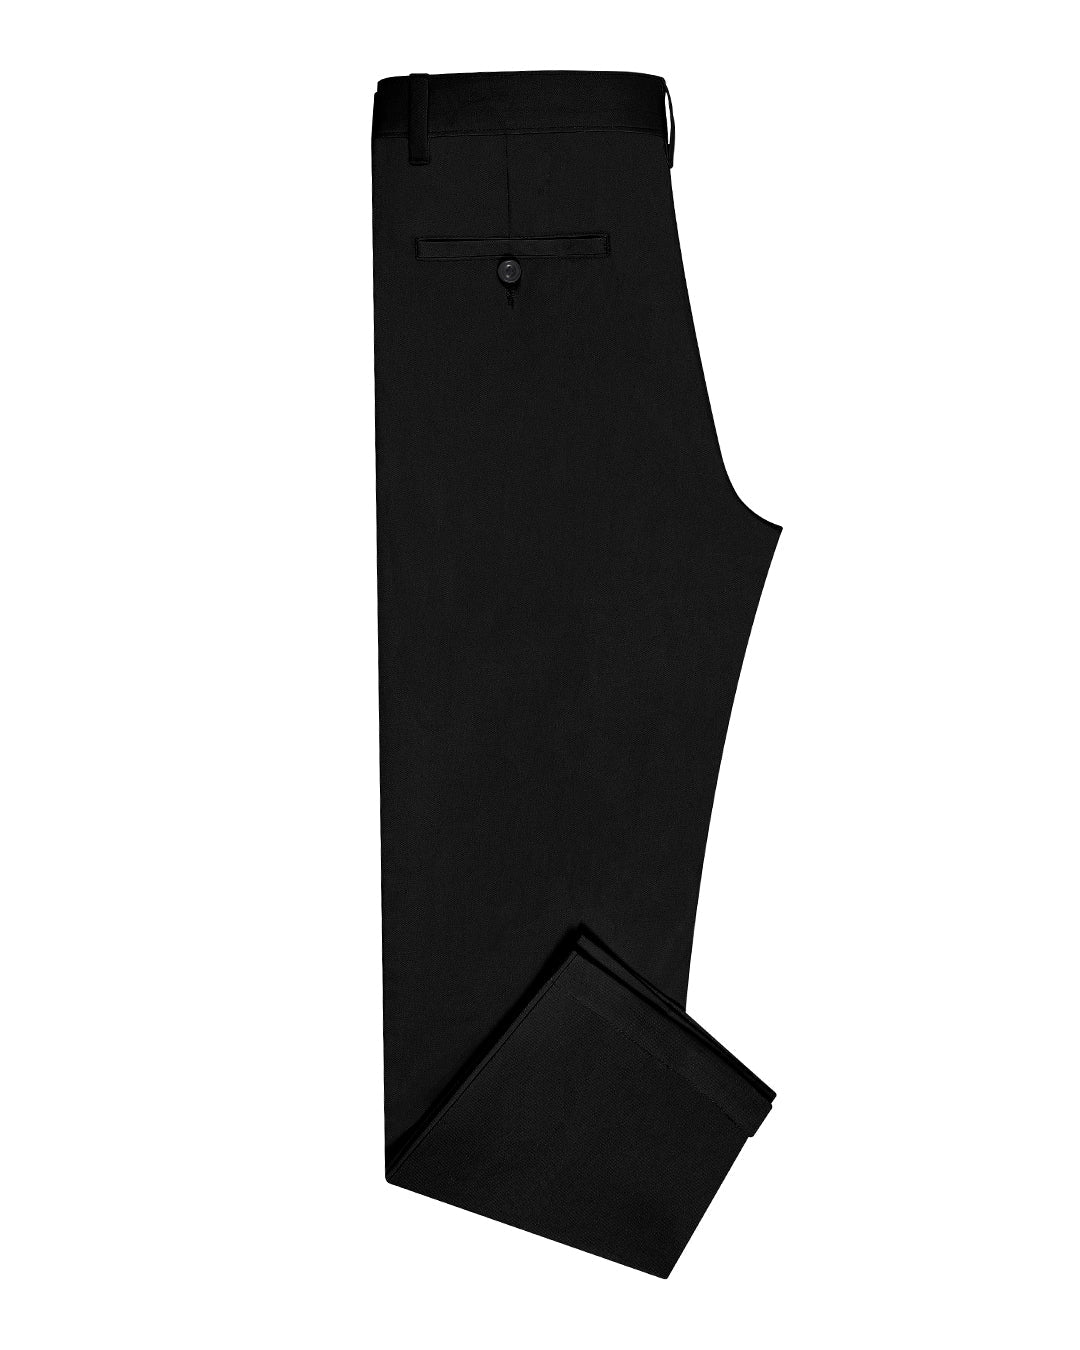 Side view of custom Genoa Chino pants for men by Luxire in black